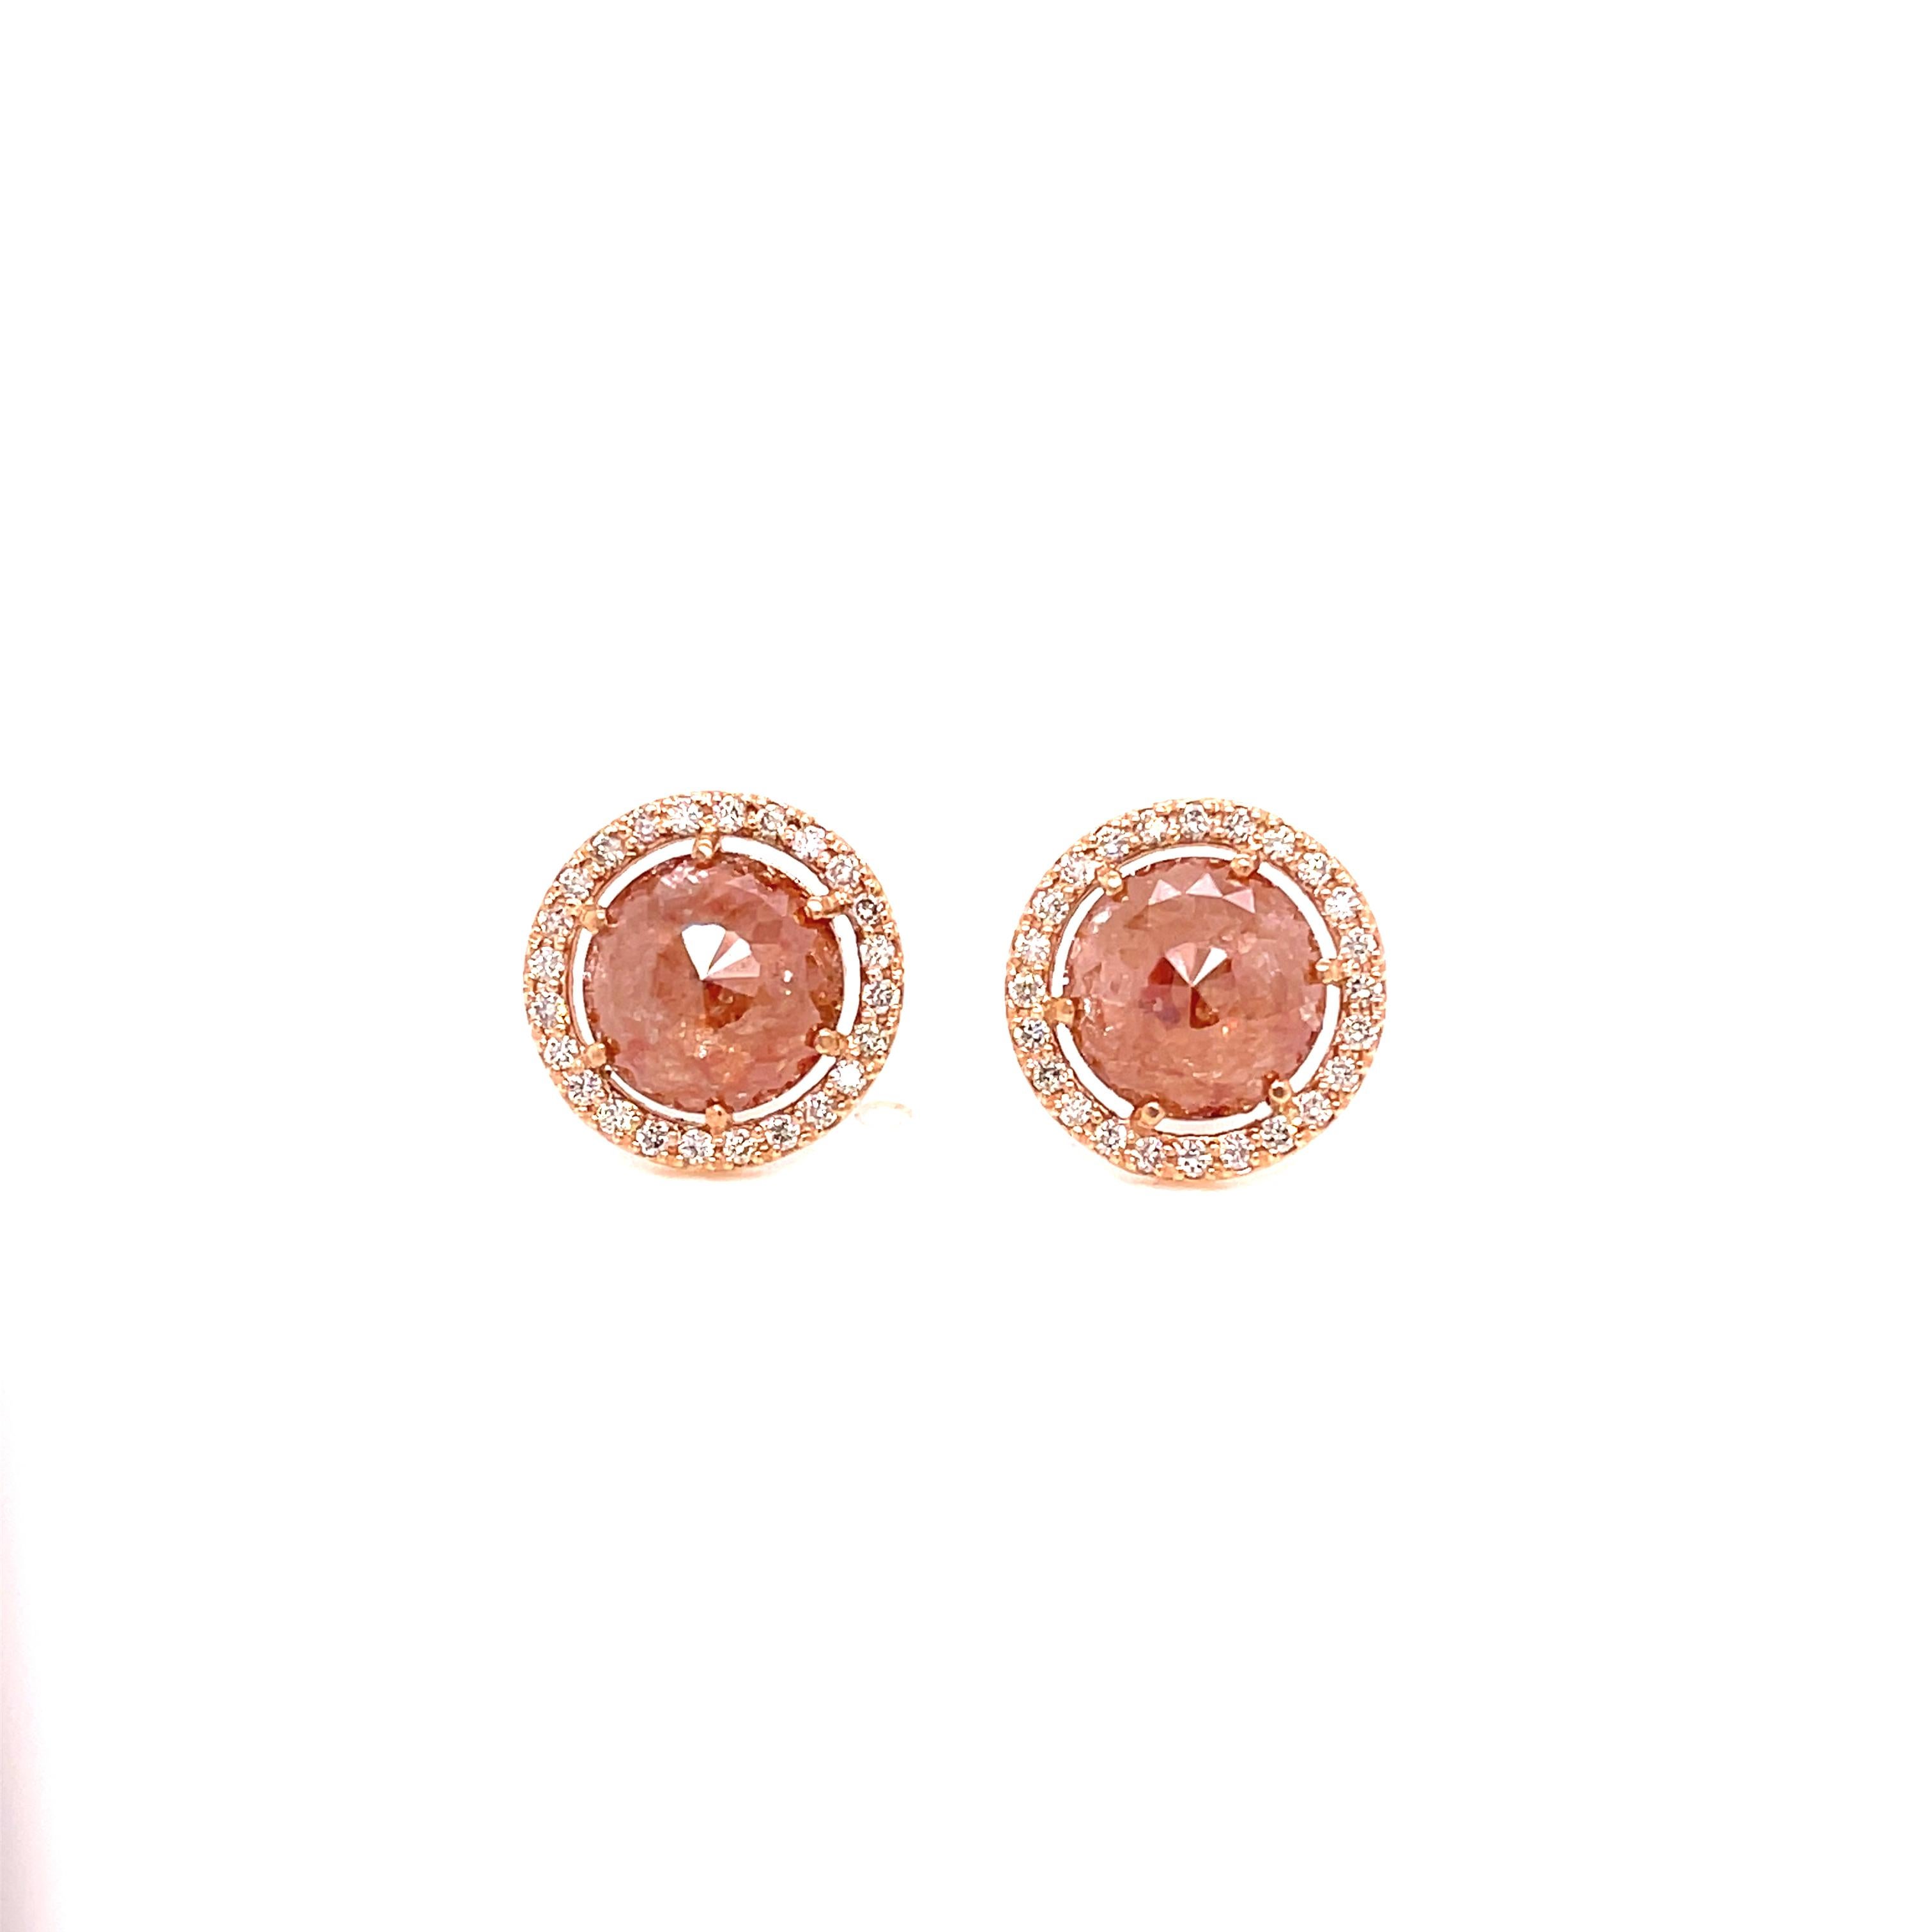 A pair of 18K rose gold studs set with 2 pinkish brown 4.35ct. rose cut diamonds and .38tcw. of top light brown faceted diamonds in a halo around the diamonds, with a pair of 18K rose gold removable earring jackets with 7.67ct. pear shaped black